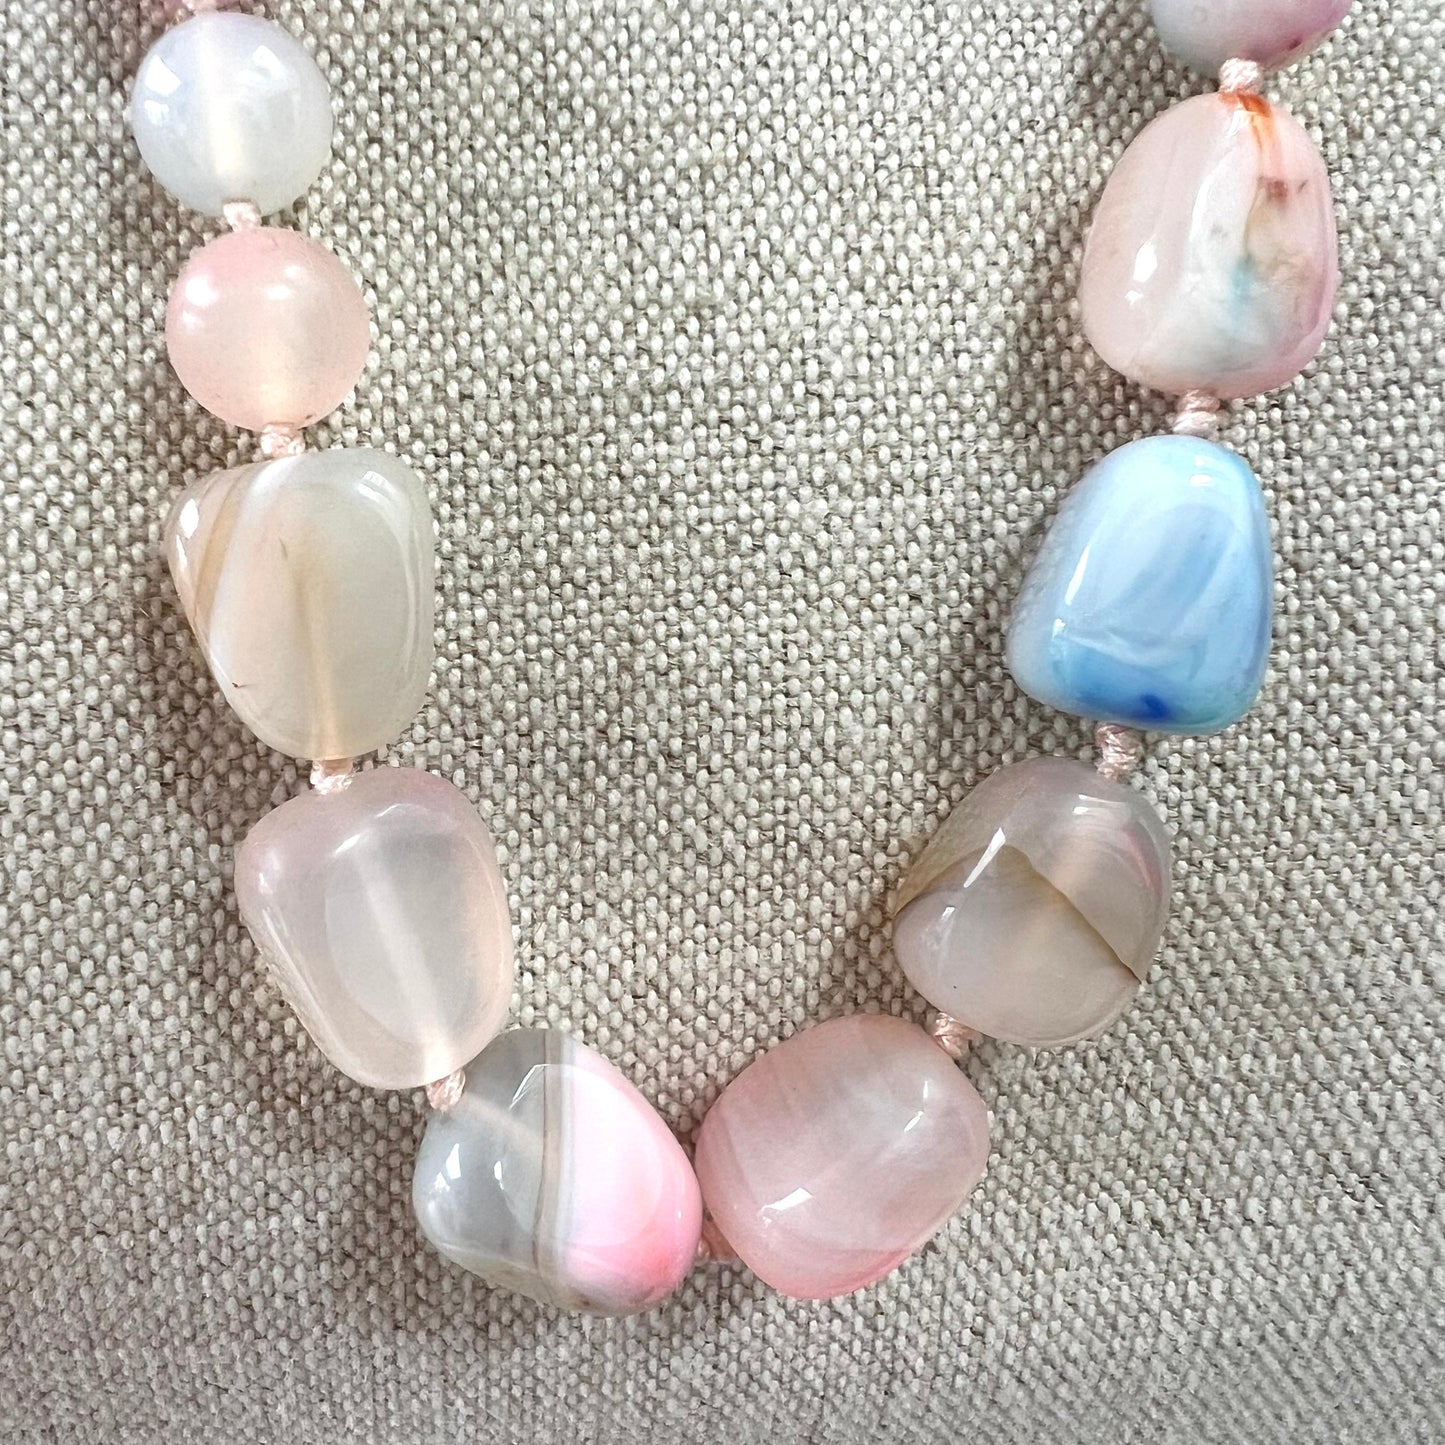 Lola Rose Hand-Knotted Graduated Semi-Precious Bead Adjustable Necklace